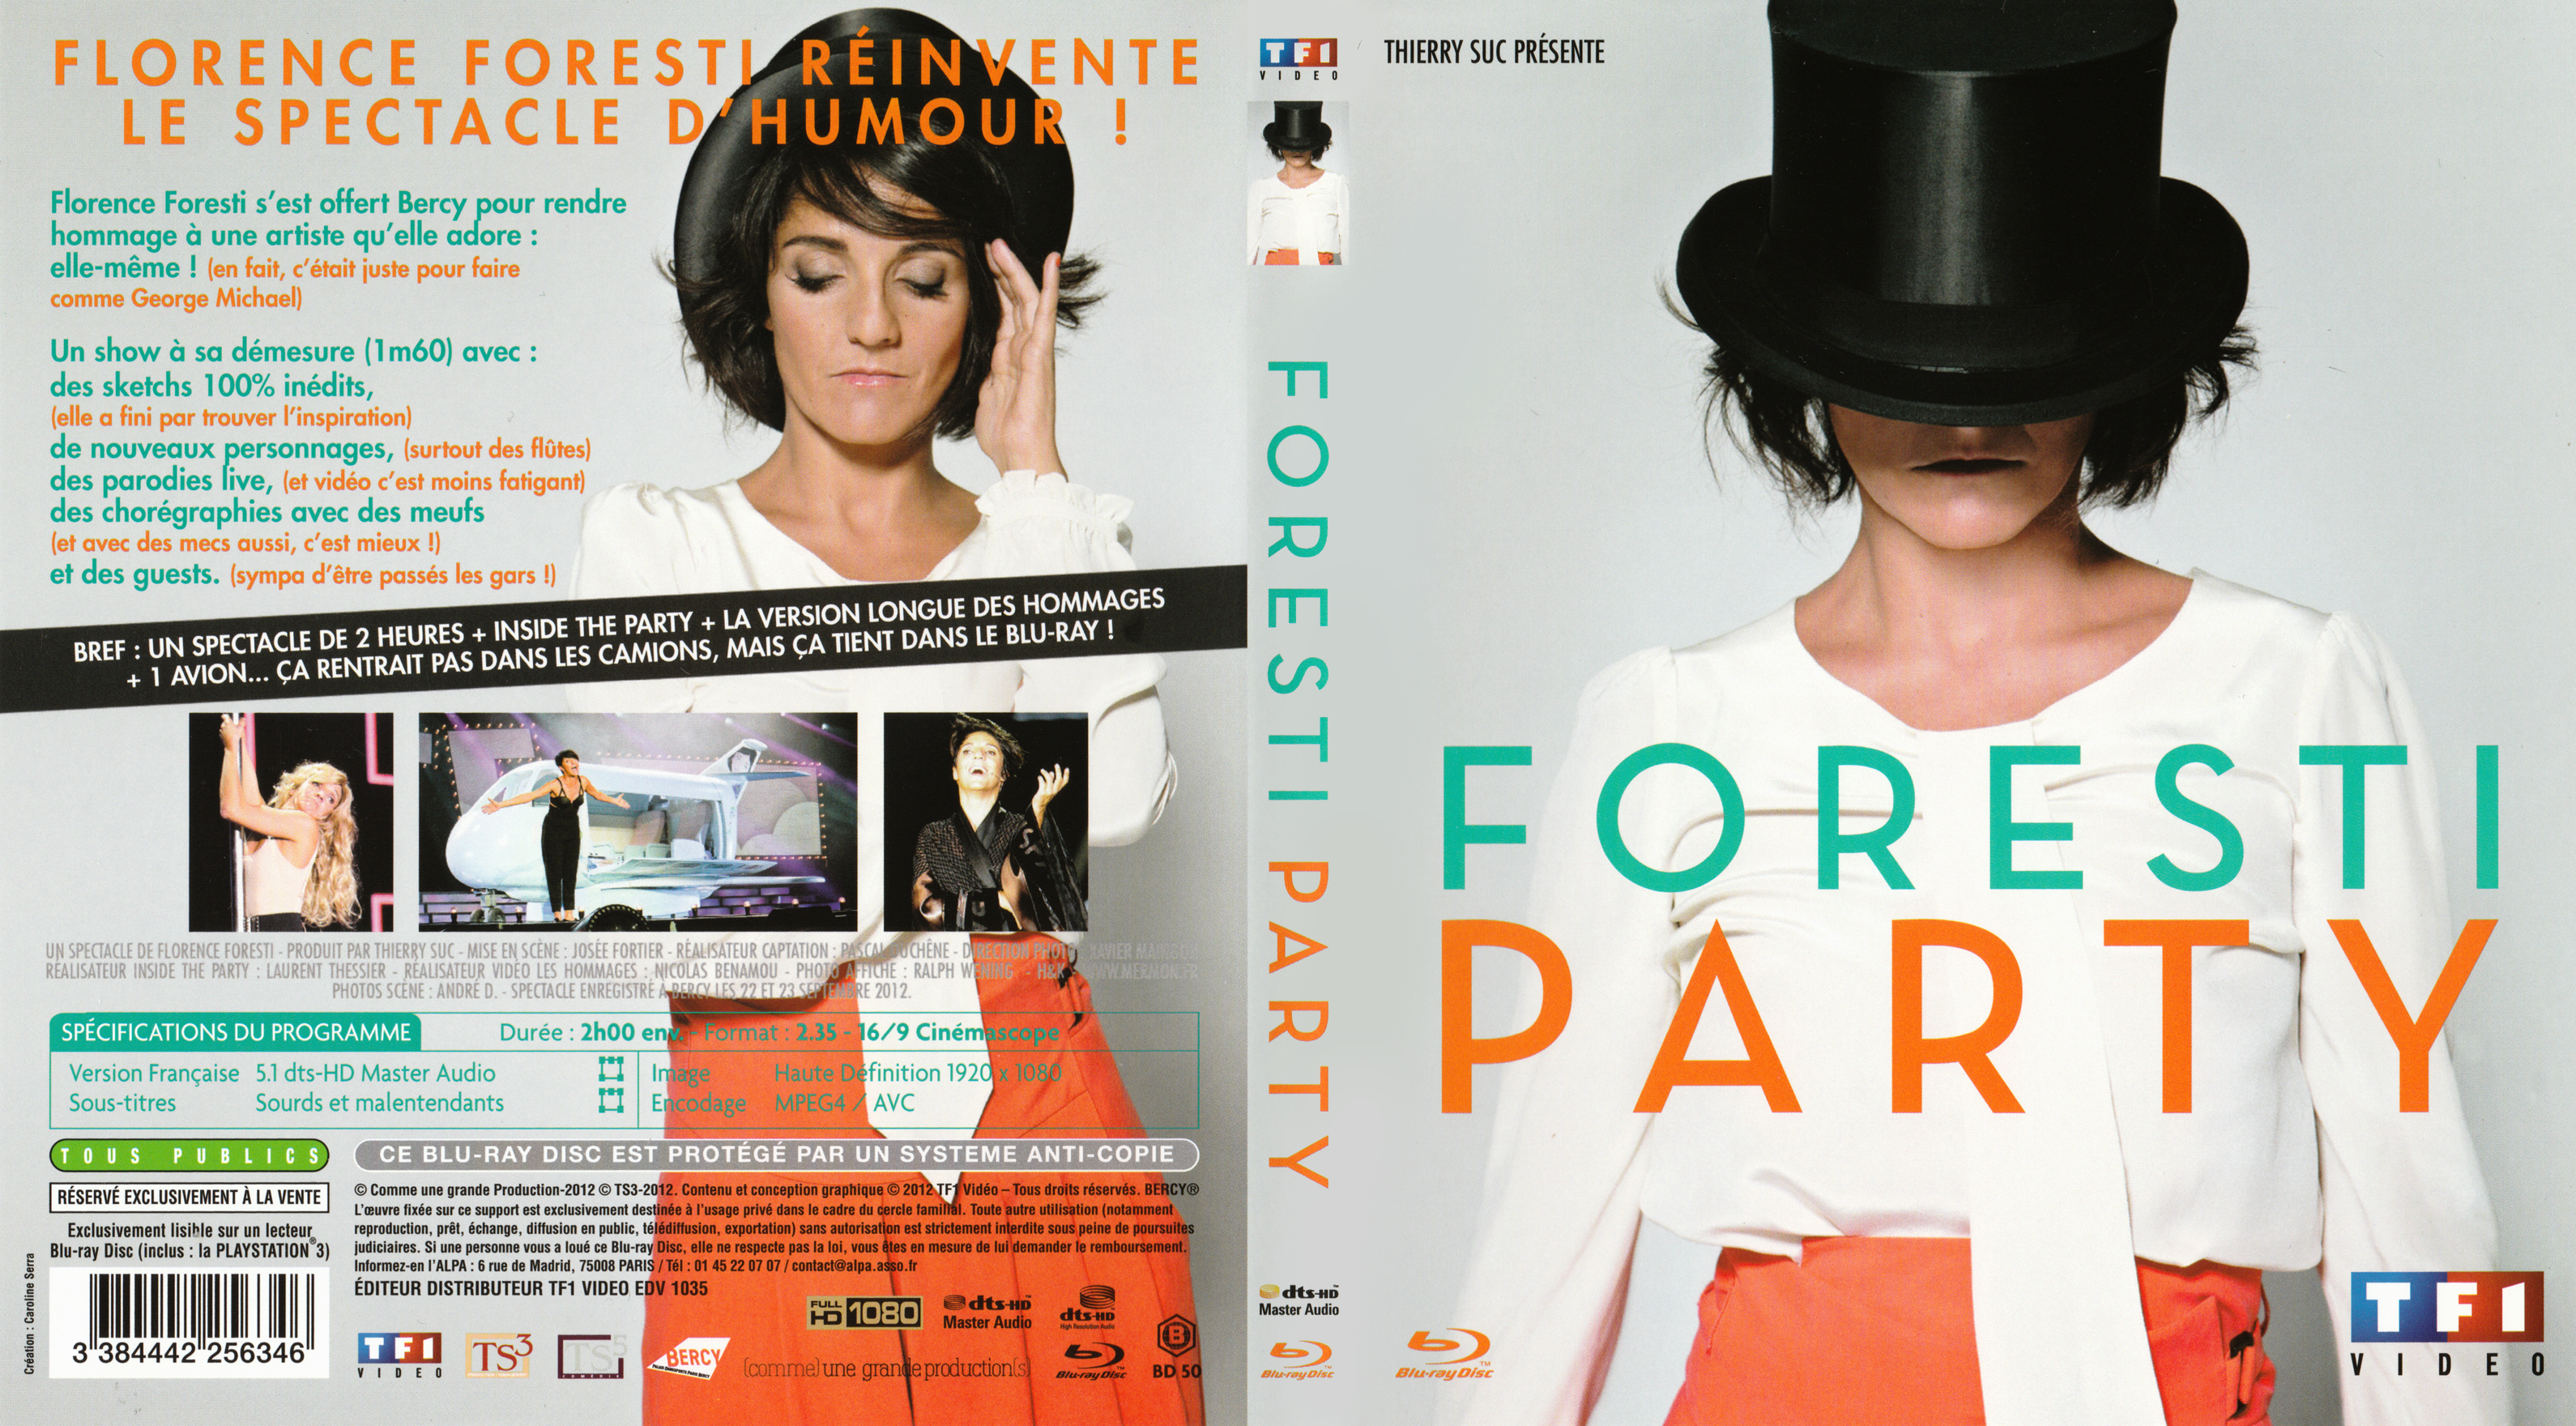 Jaquette DVD Foresti party (BLU-RAY) v2